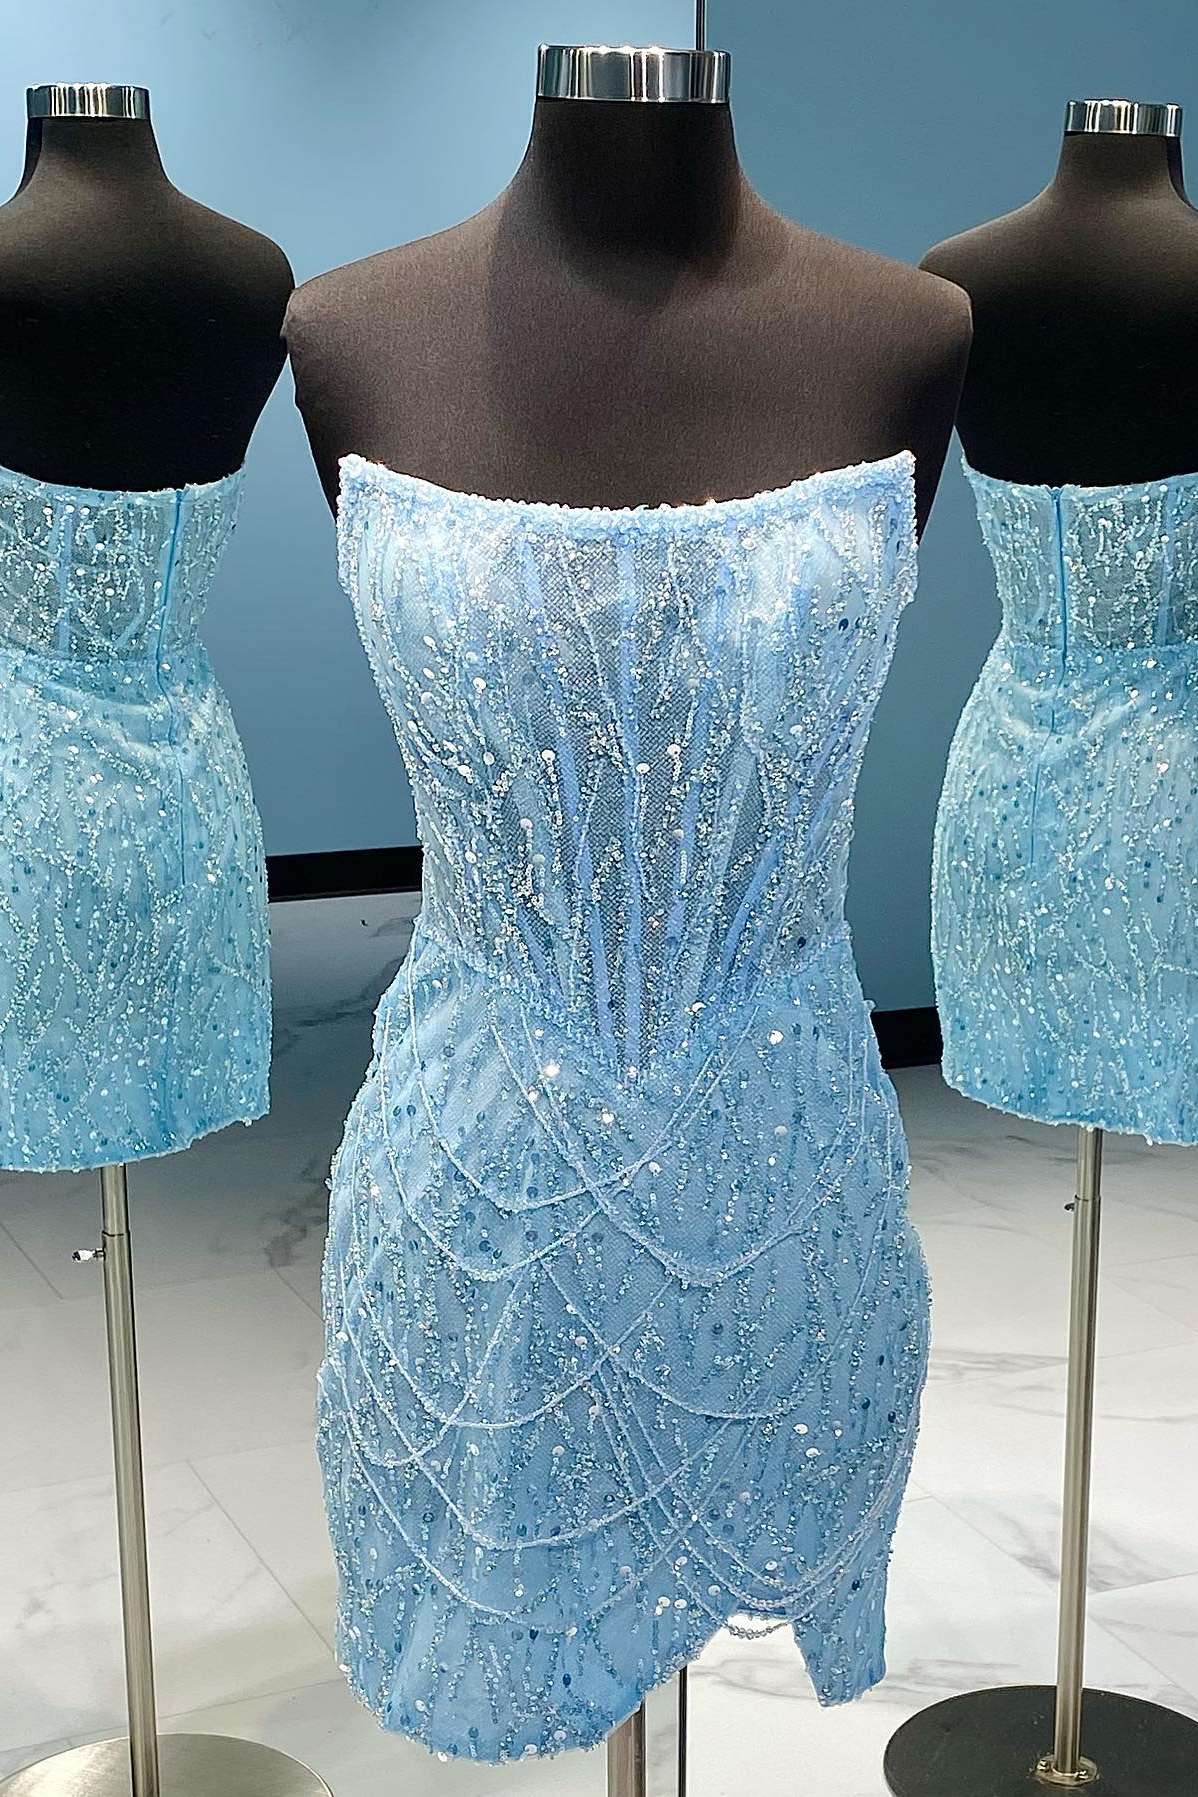 Light Blue Strapless Short Corset Homecoming Dress outfit, Homecoming Dresses Tight